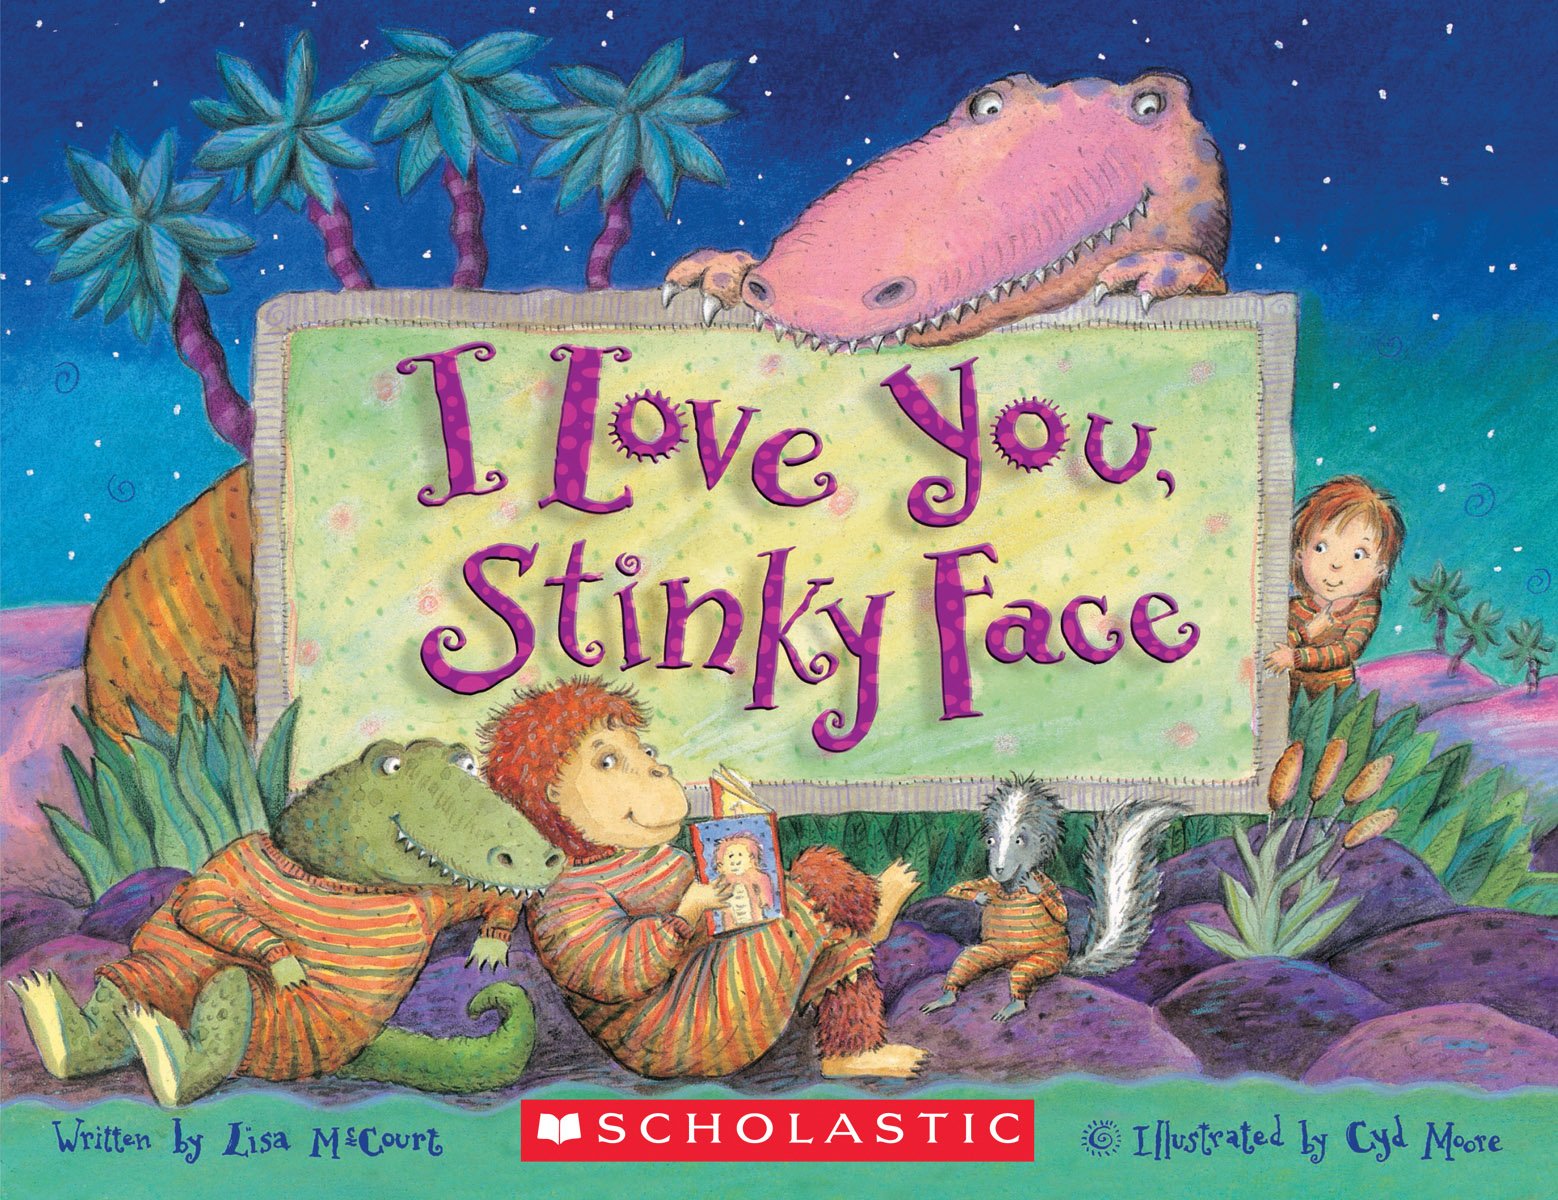 Image of the book cover I Love You Stinky Face by Lisa McCourt, featuring a pink dinosaur holding a sign with the title of the book and a small green dinosaur, a monkey, a skunk and a little child in matching pajamas listening to a story that the monkey is reading. 